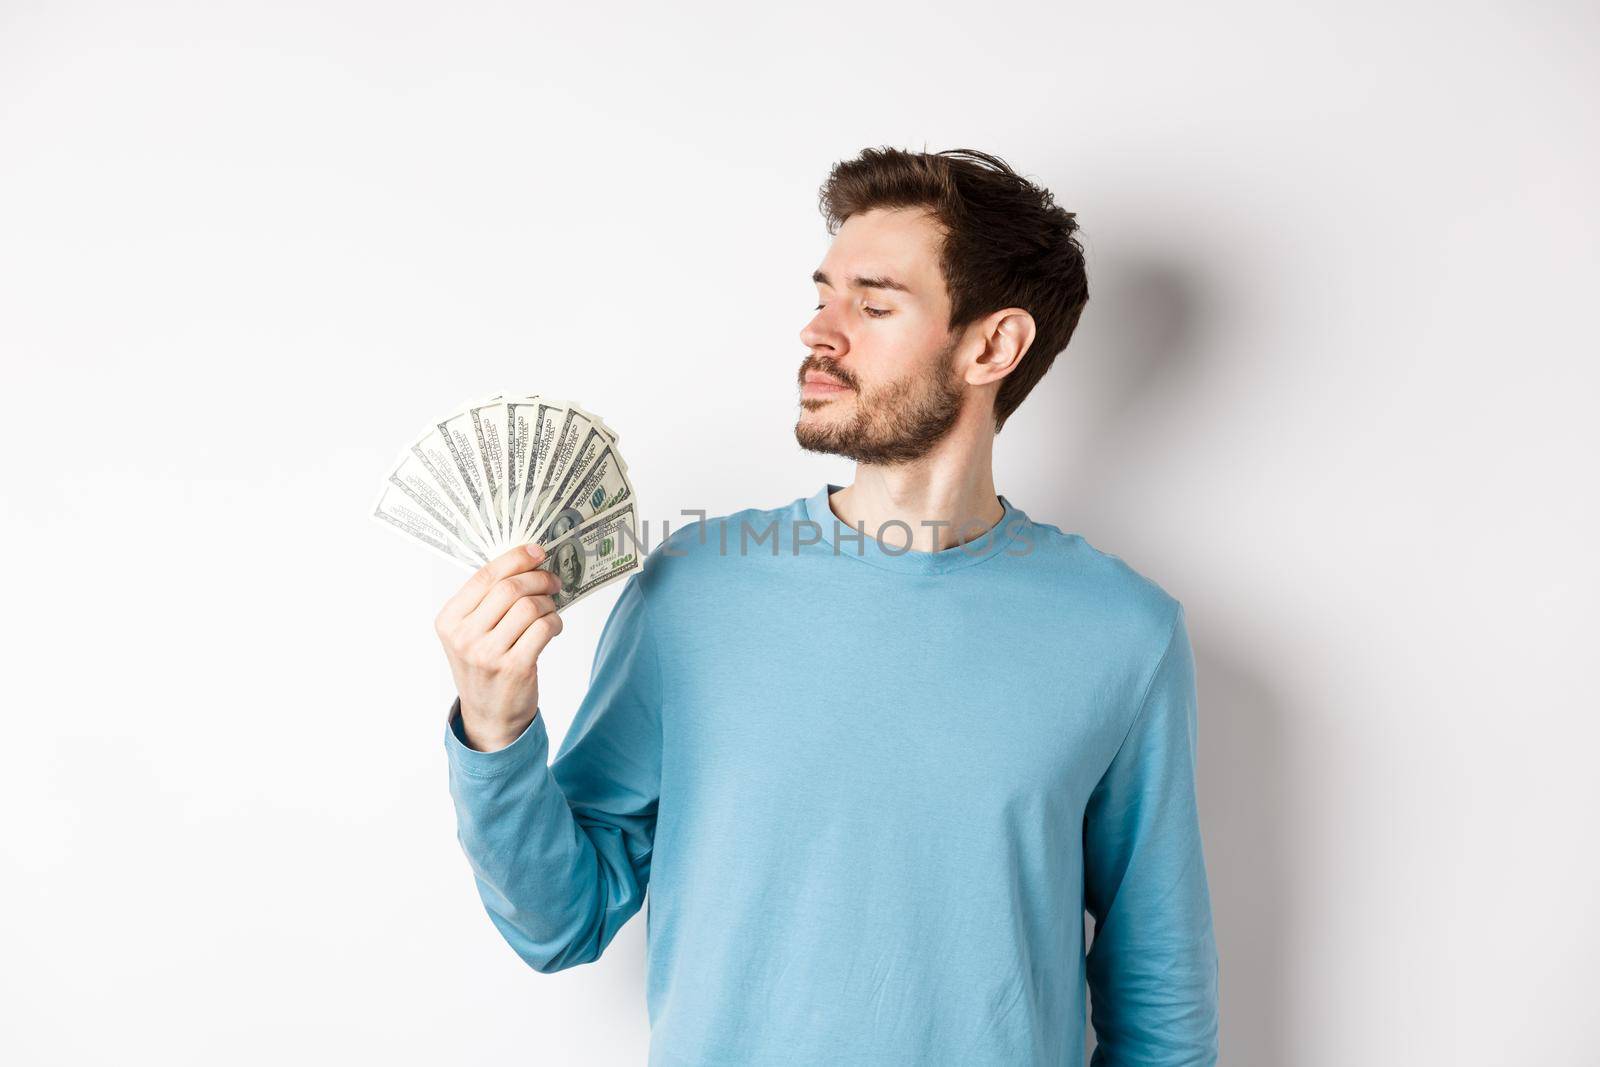 Handsome rich man with beard looking at money, got quick loan, standing over white background.